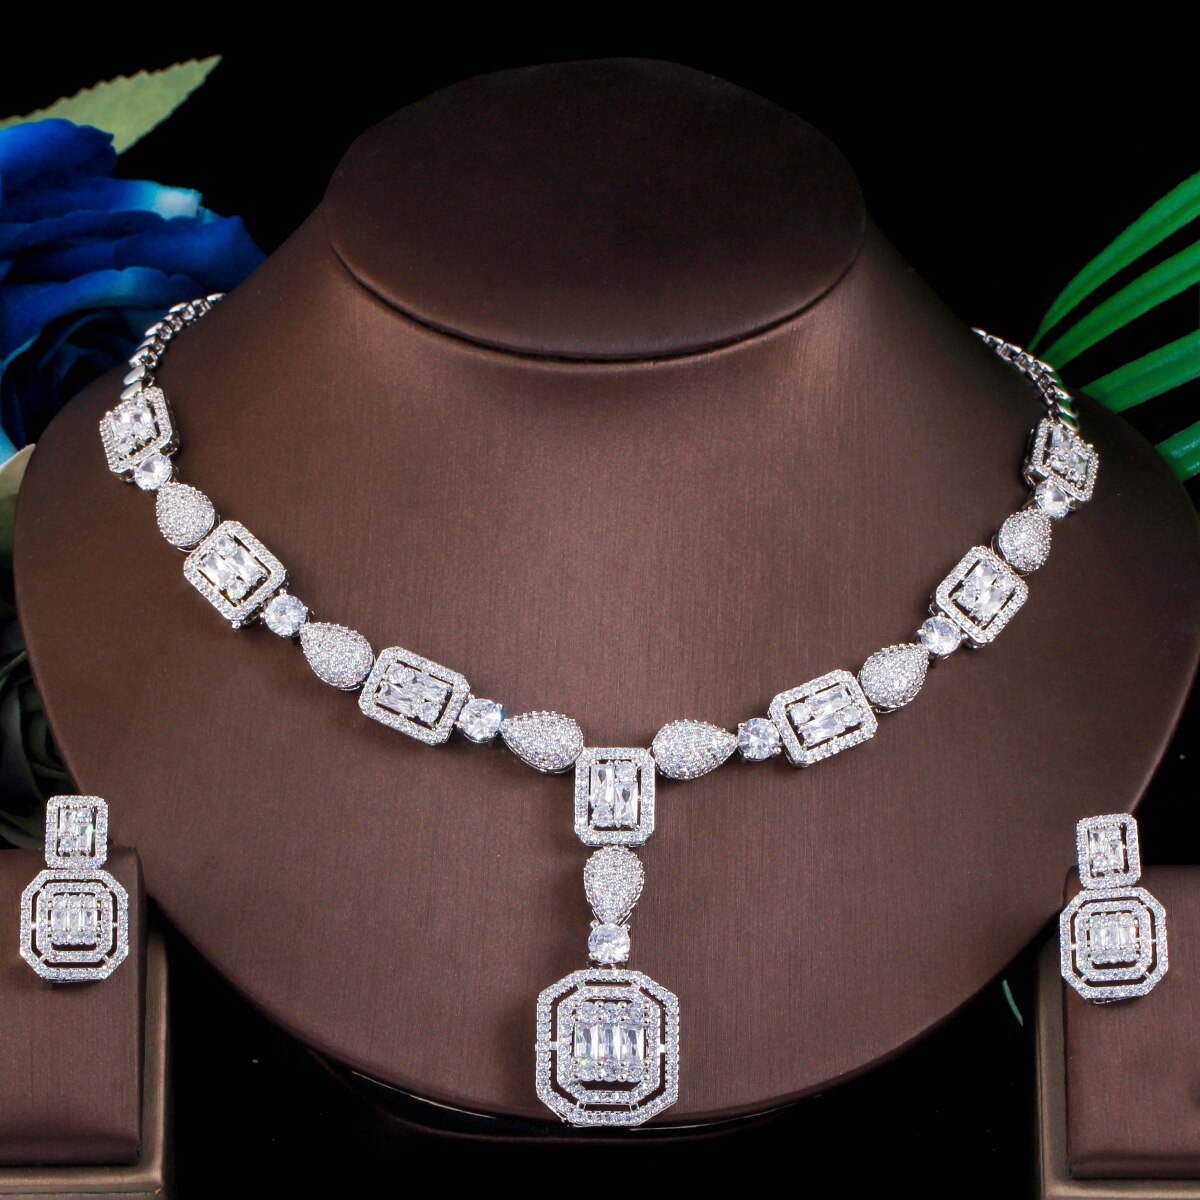 ThreeGraces-Elegant-Bridal-Wedding-Square-Necklace-Earrings-Sets-White-CZ-Crystal-Silver-Color-India-1005001616553168-5